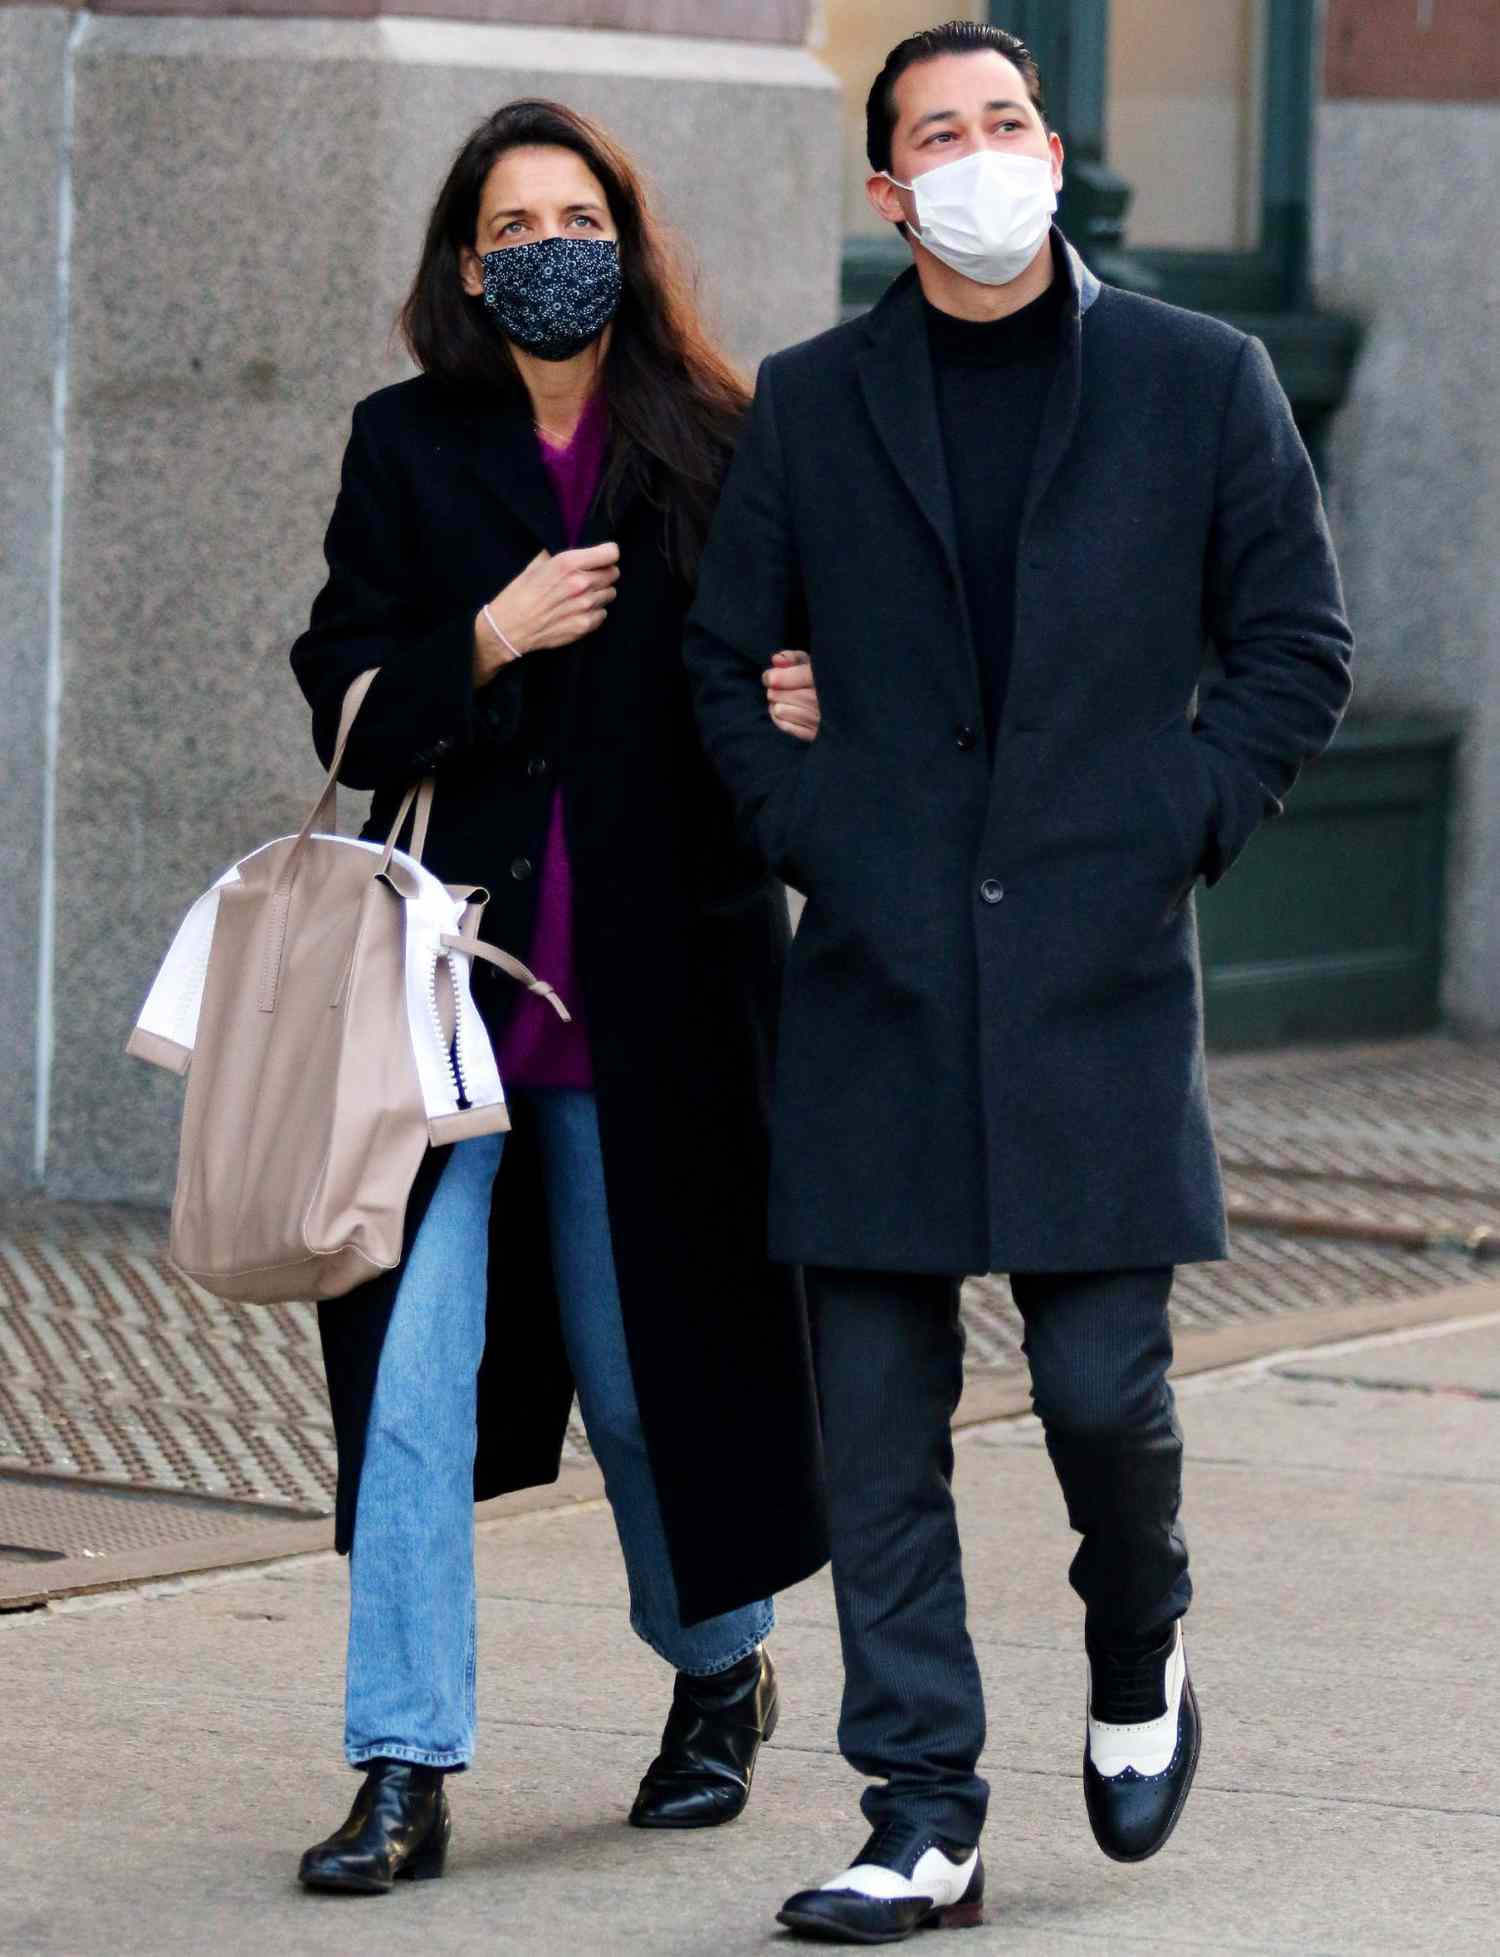 Katie Holmes and Emilio Vitolo Jr. are all smiles as they go on a romantic stroll after spending Christmas together in NYC